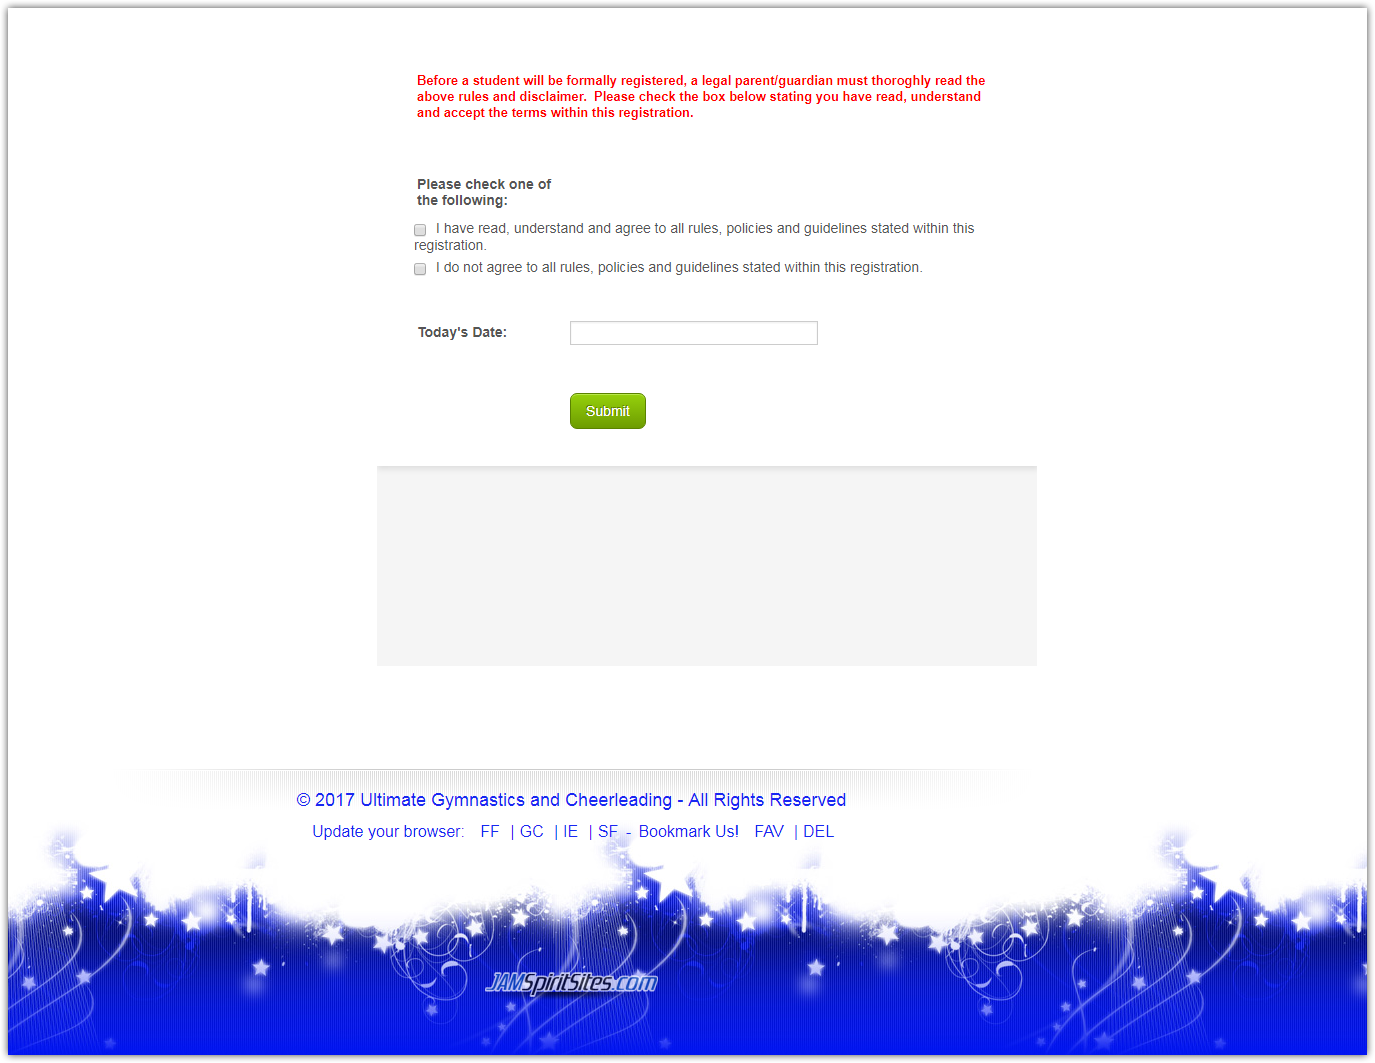 Submit button missing on embedded form Image 1 Screenshot 20